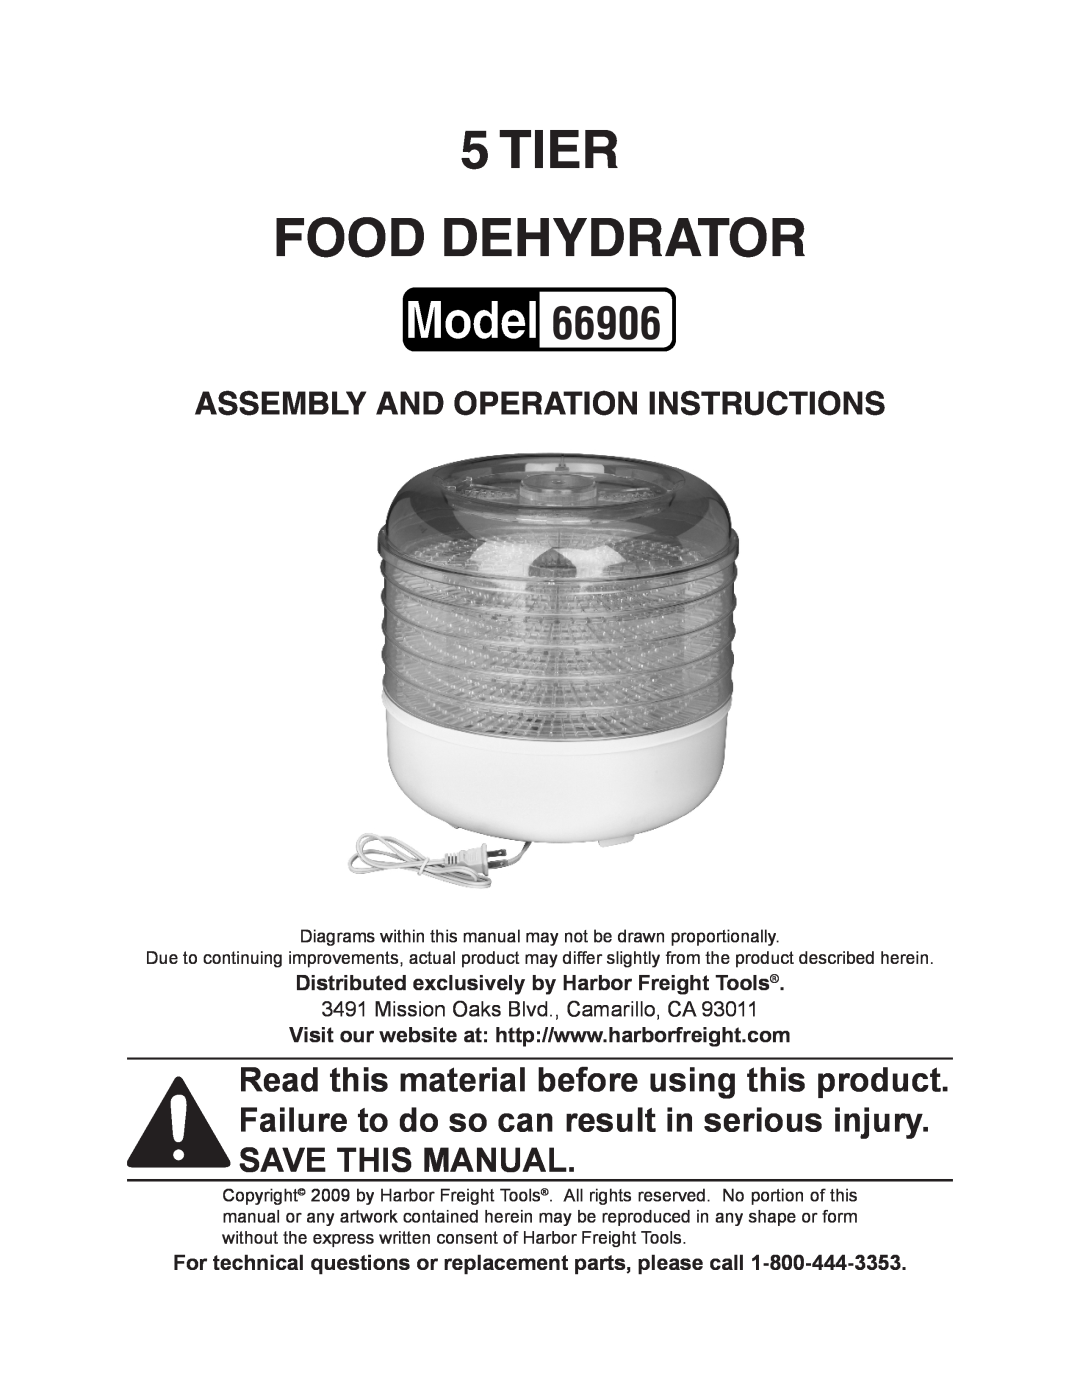 Harbor Freight Tools 66906 manual 5TIER FOOD DEHYDRATOR, Assembly And Operation Instructions 